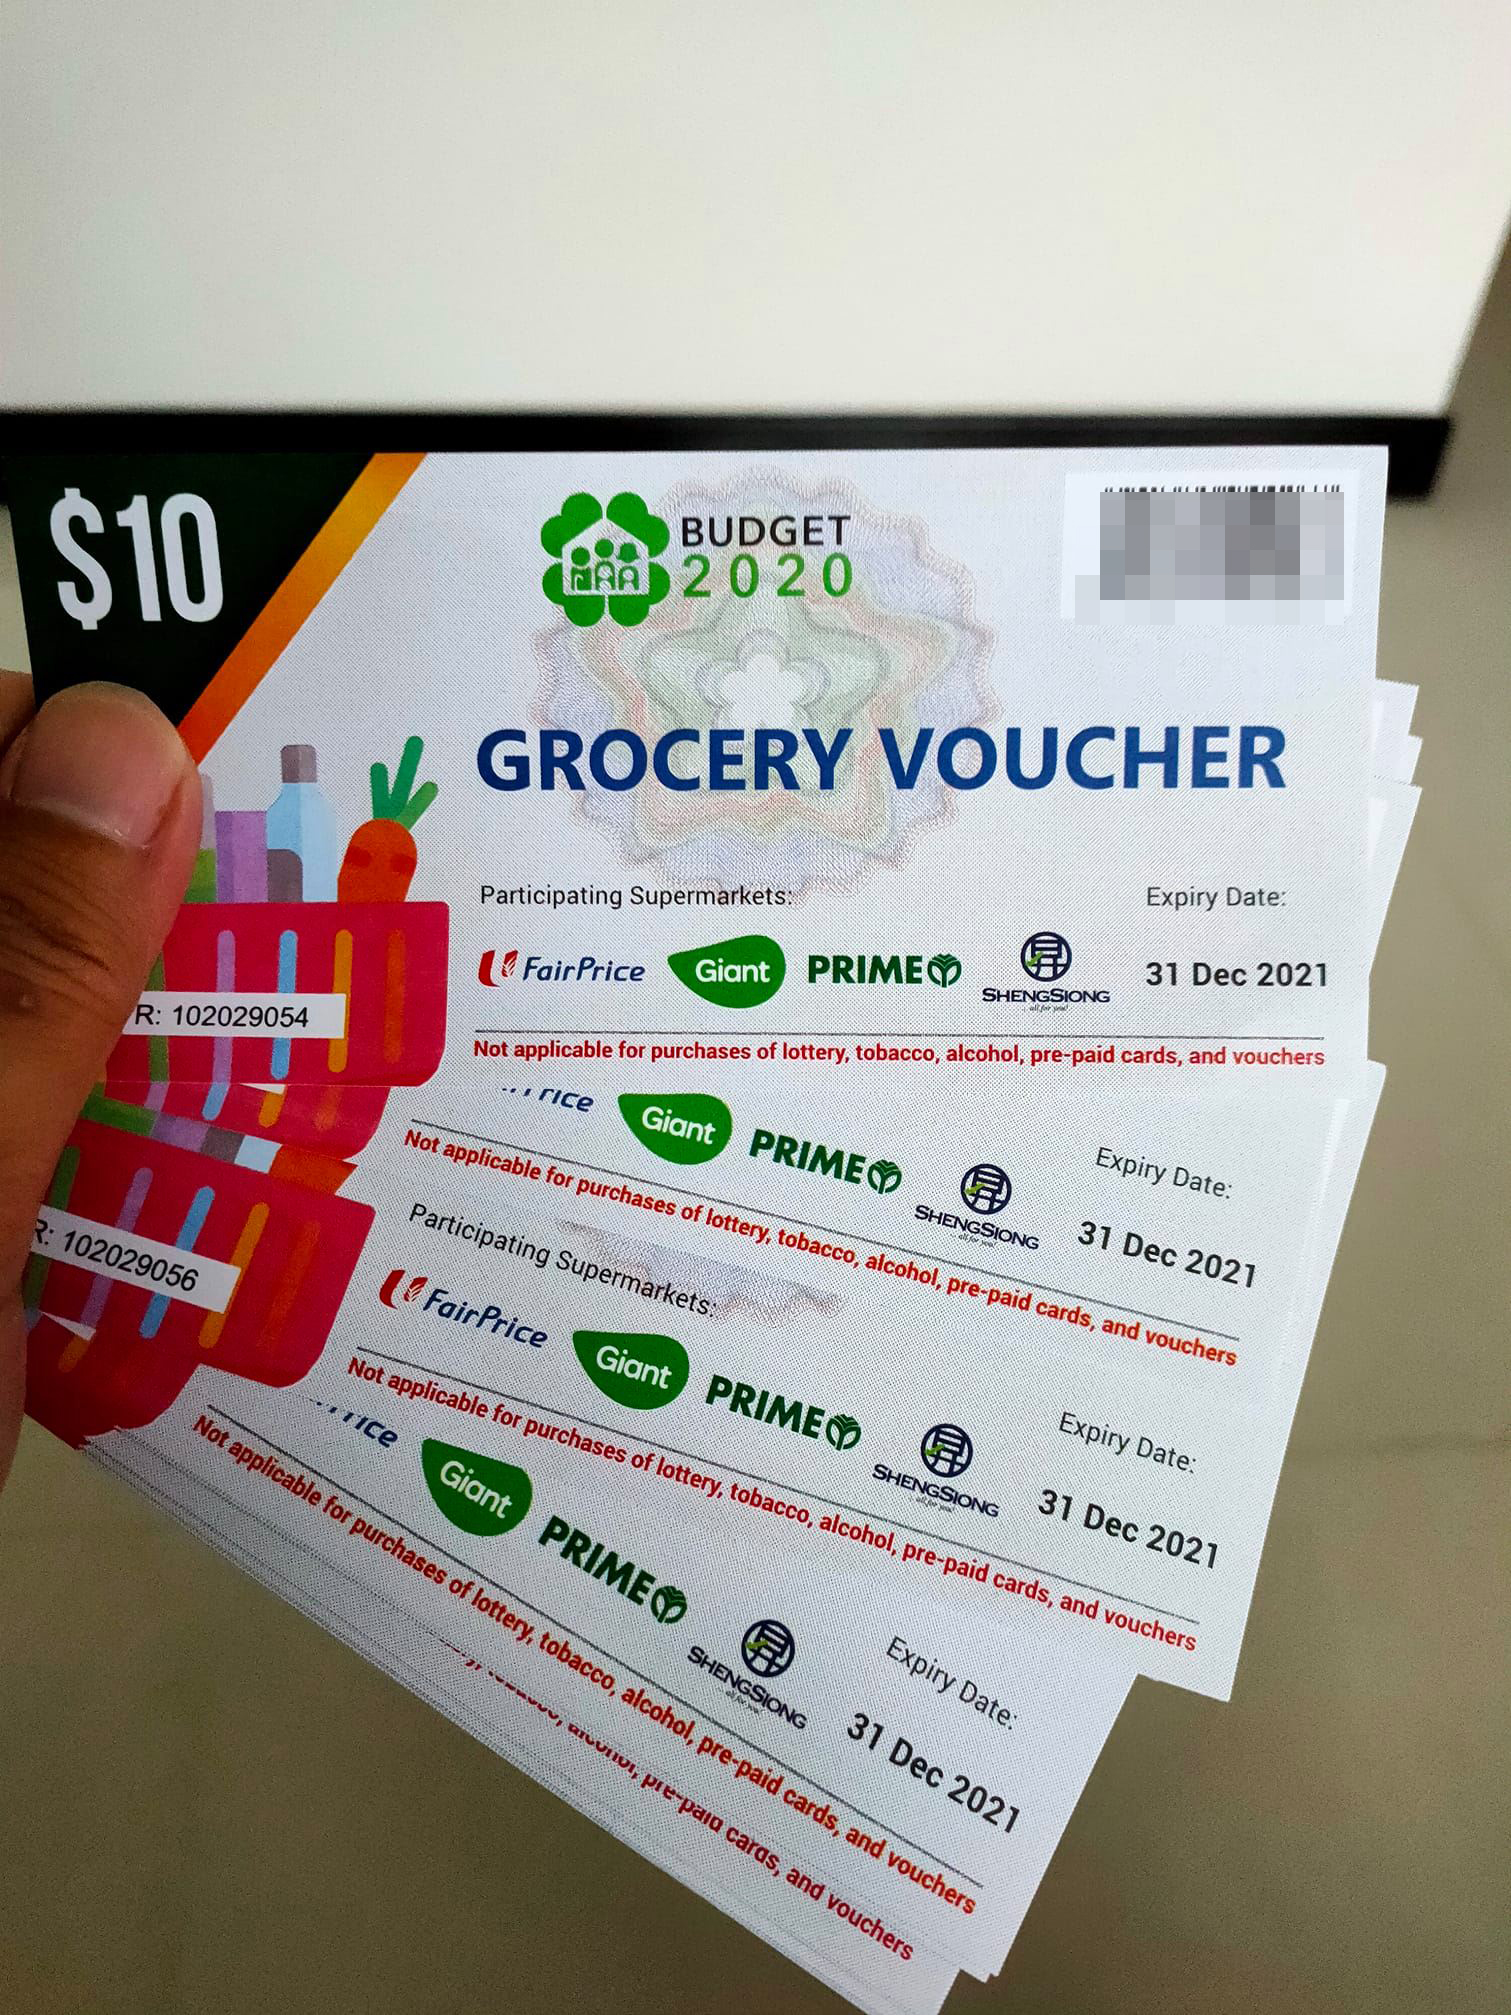 How To Get Free Grocery Vouchers